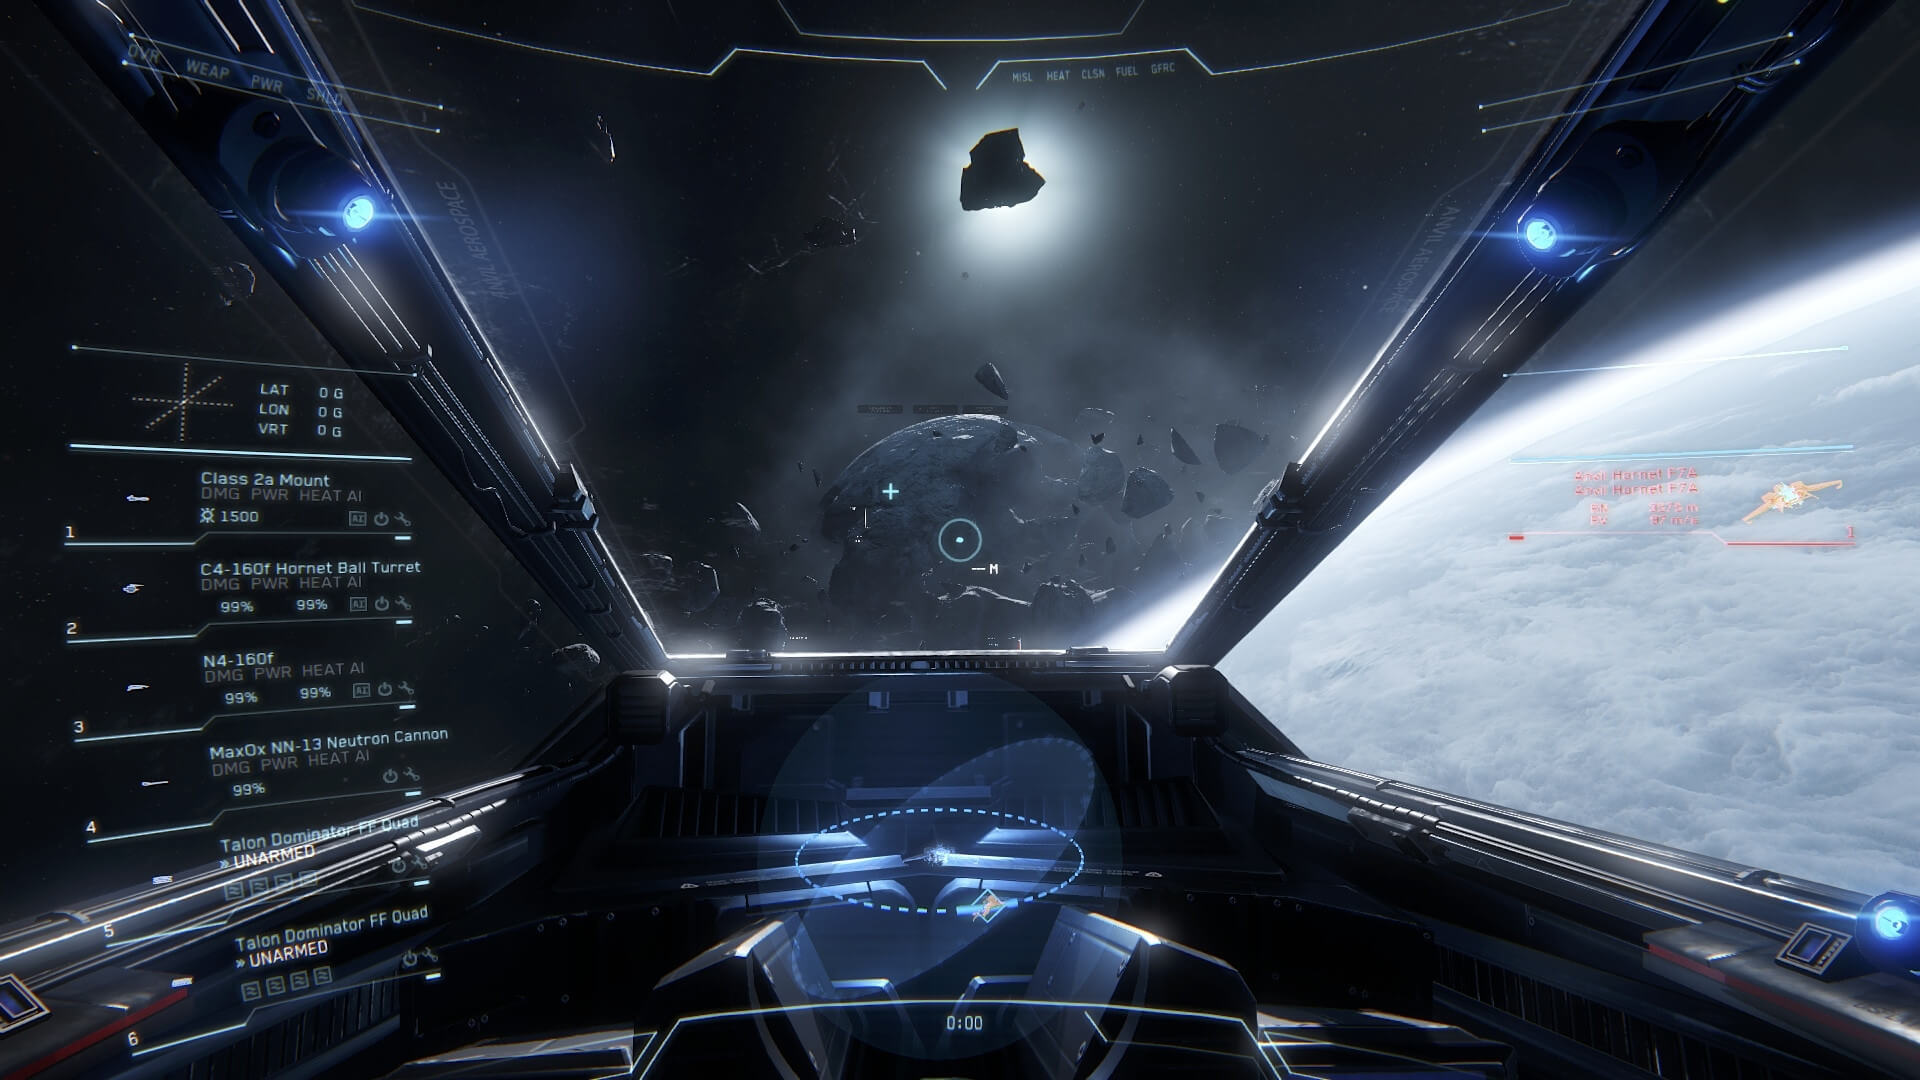 No 'Star Citizen' Release Date in Sight, Work Environment is 'Chaotic